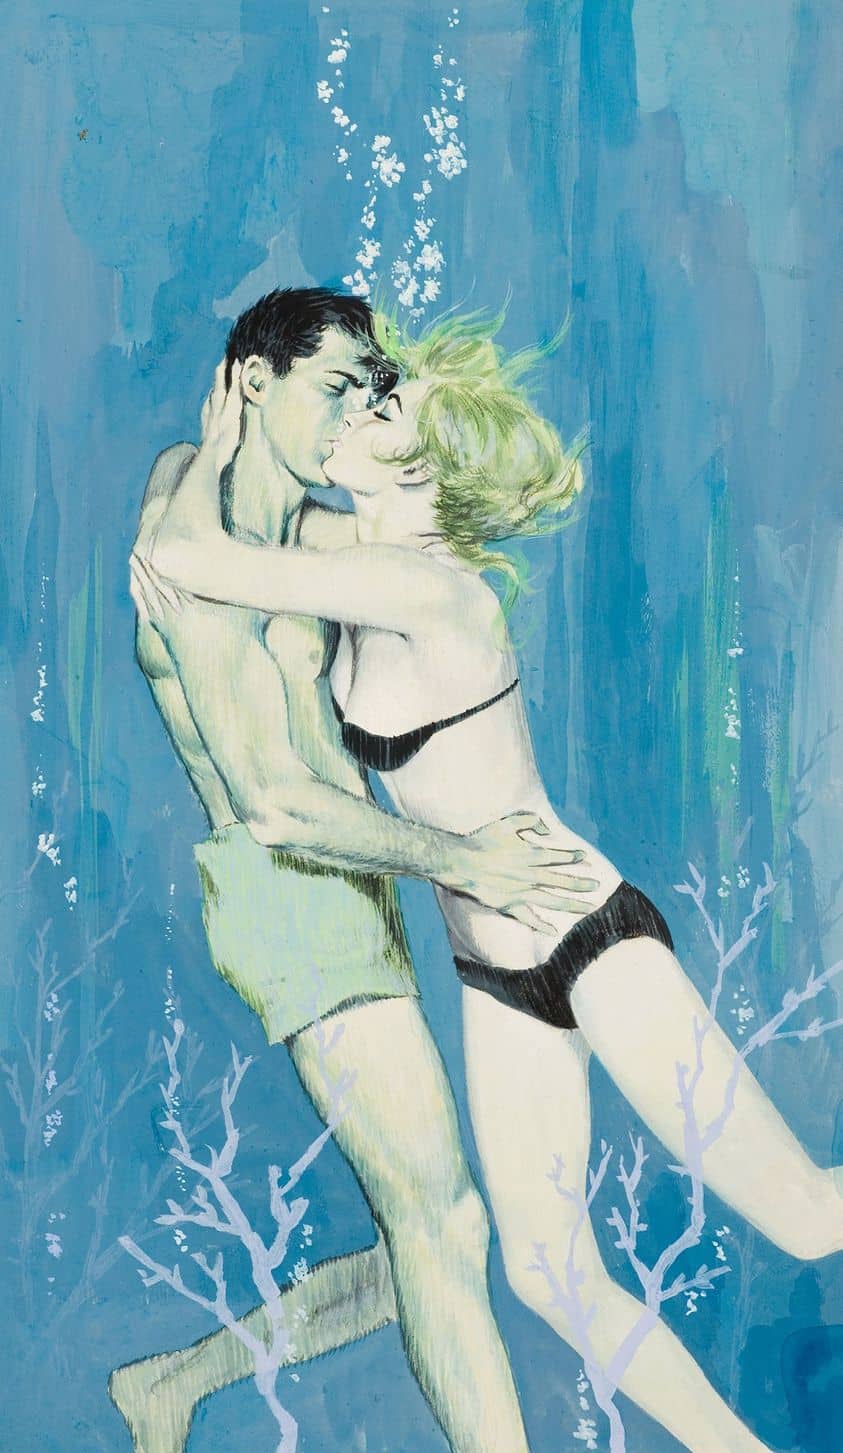 Ser Leone (American, 20th Century) The Underwater Kiss, paperback cover